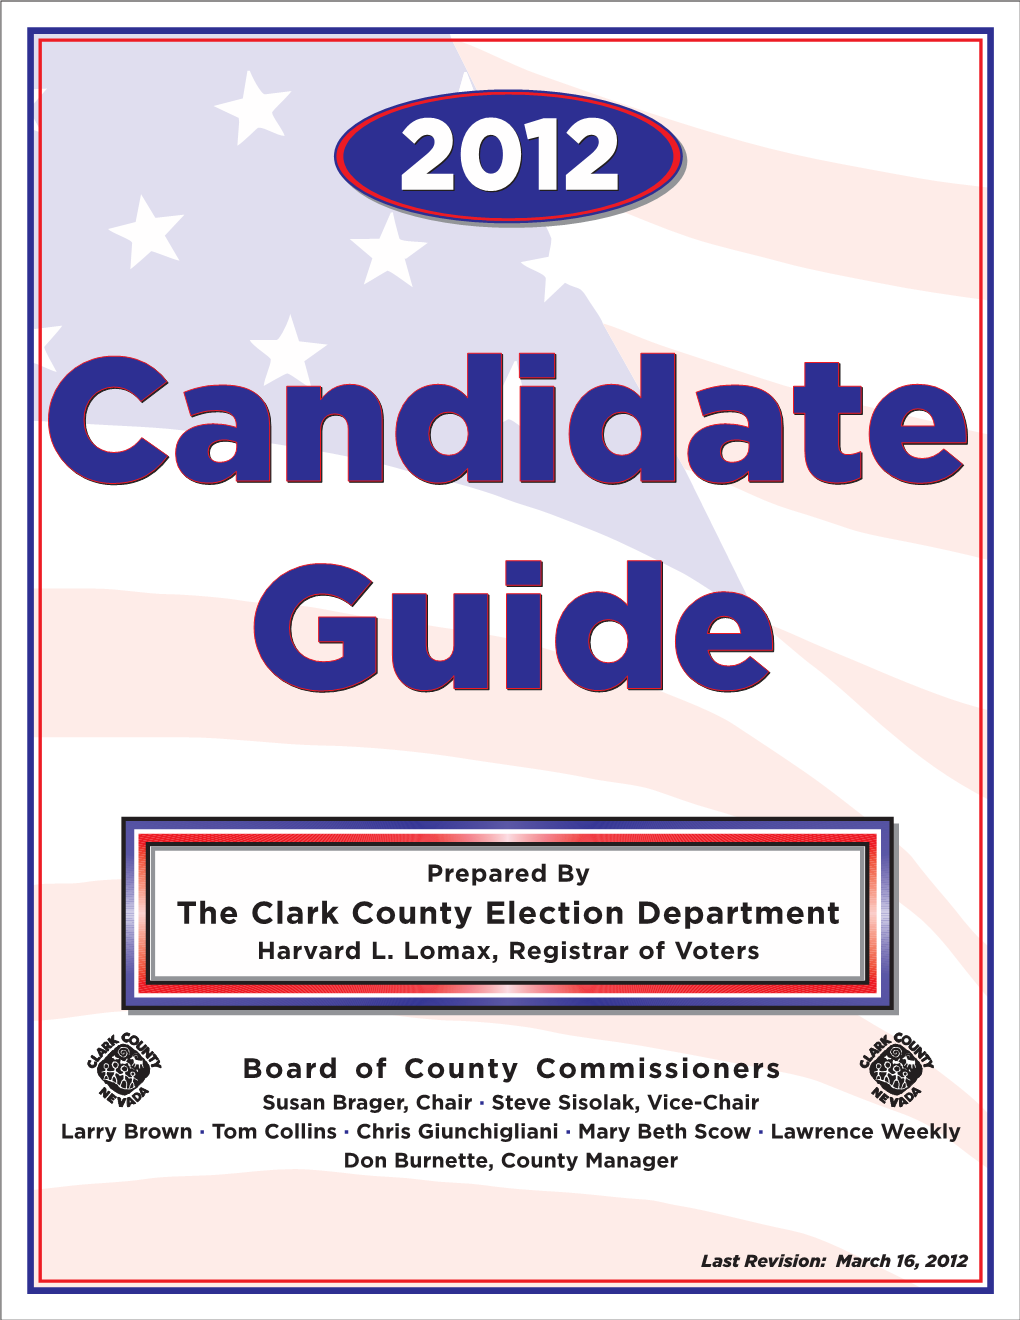 The Clark County Election Department Harvard L